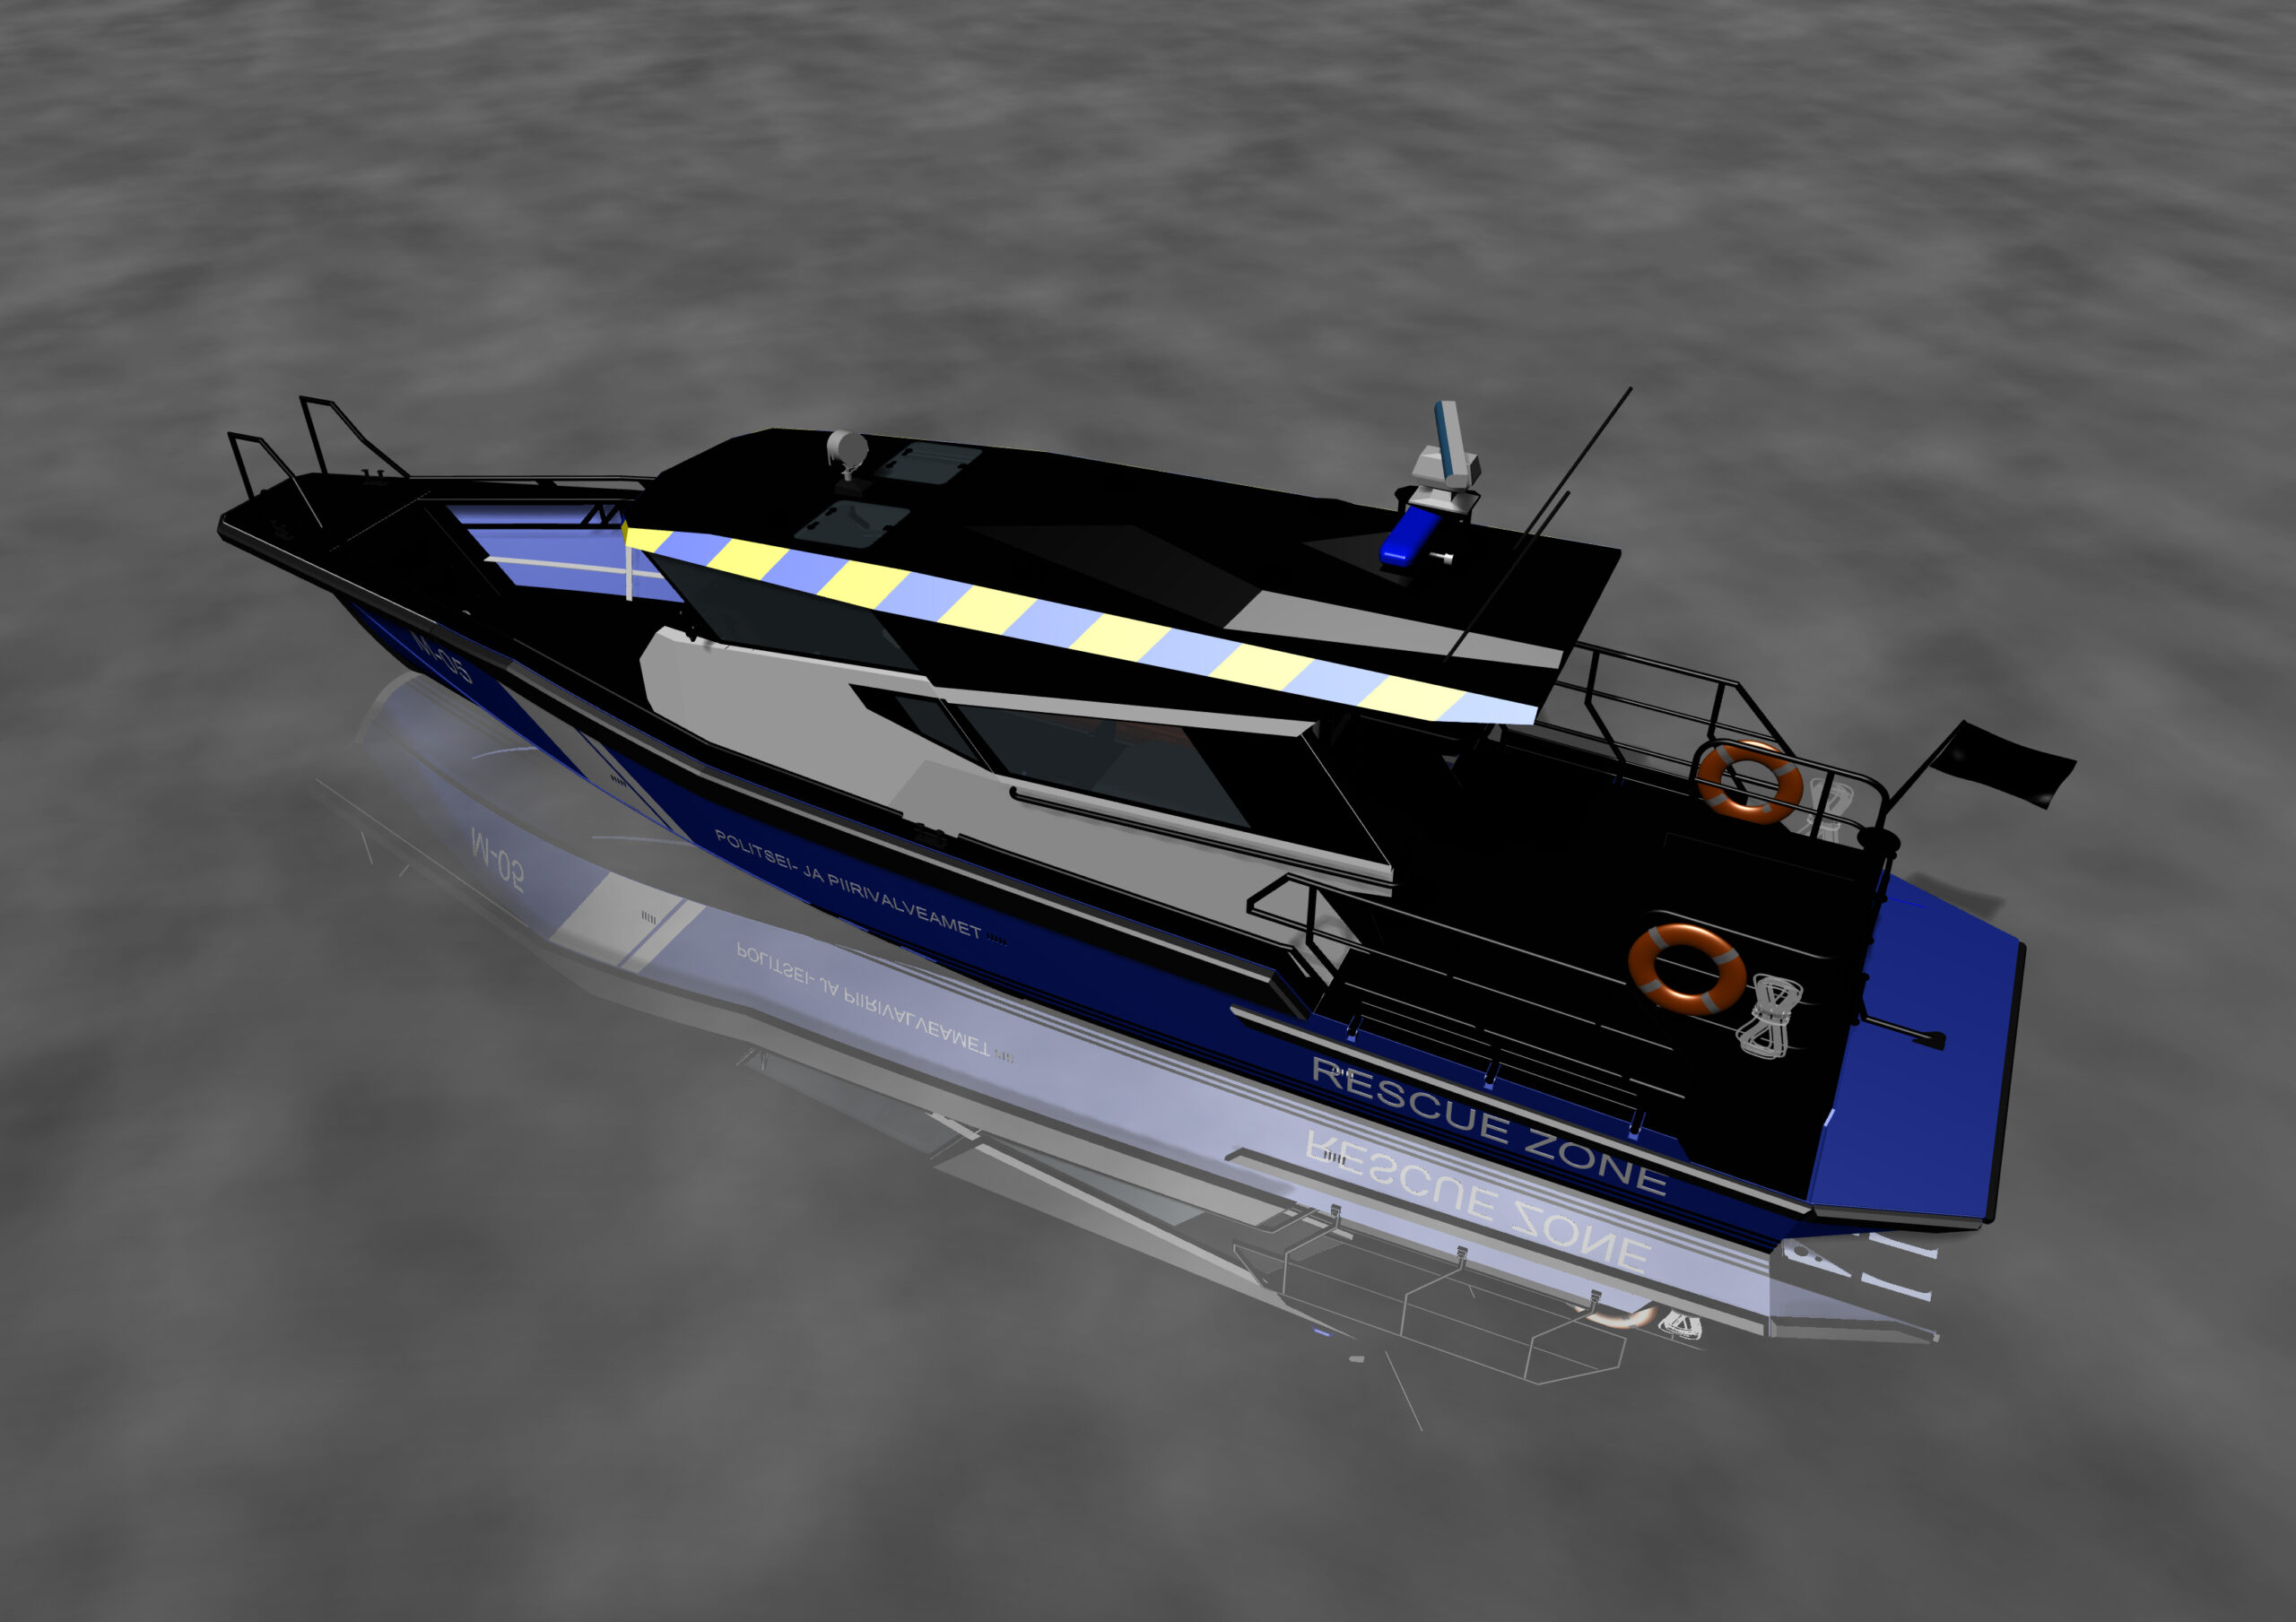 Law enforcement boat, aluminium patrol boat, aluminium sar boat for search and rescure